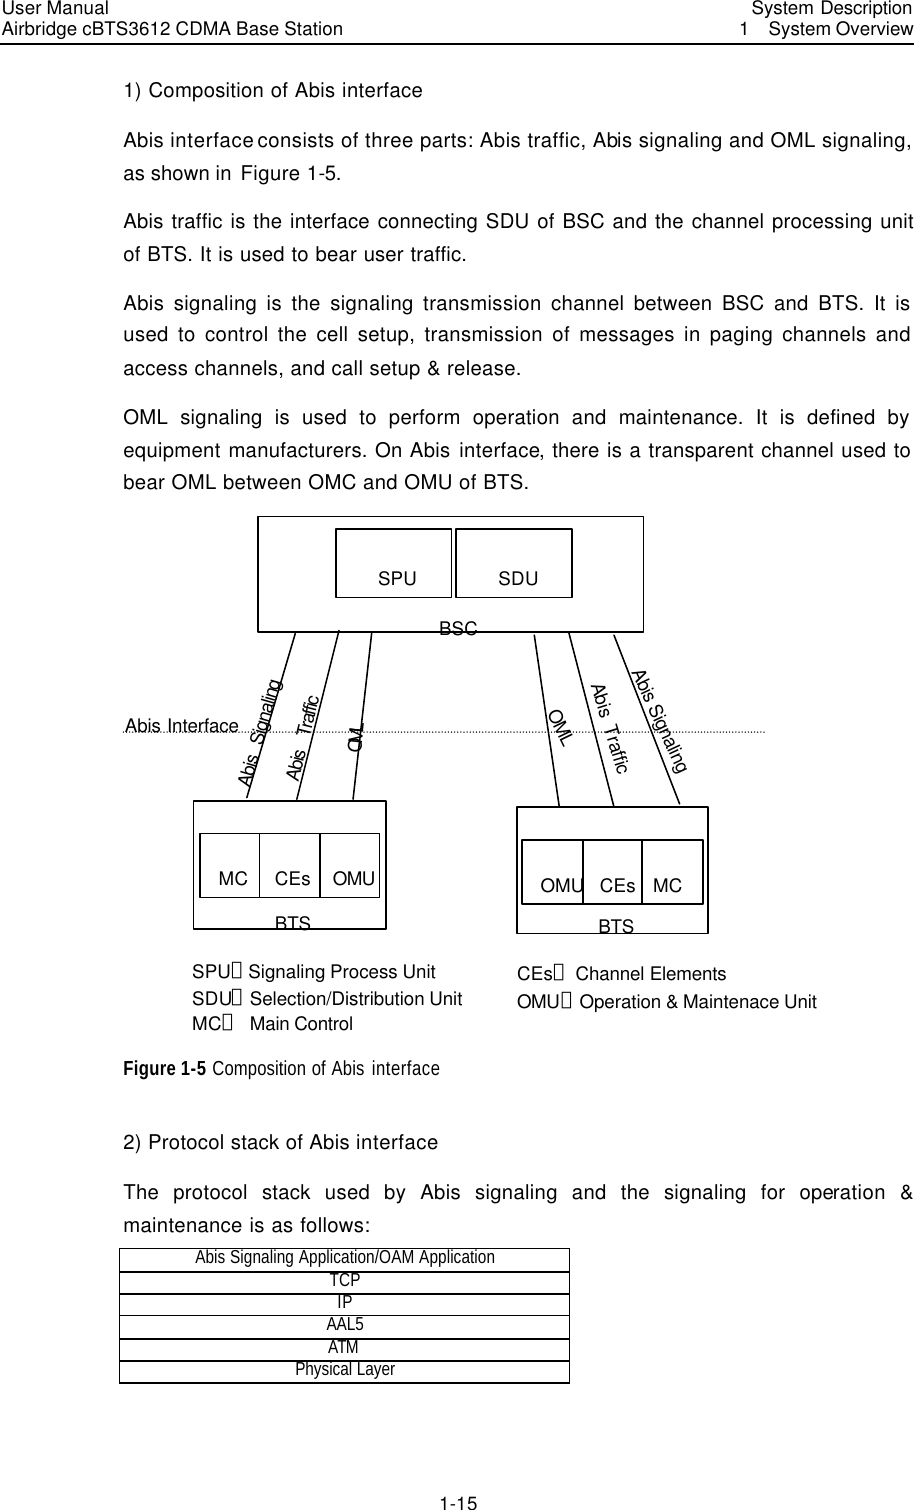 User Manual Airbridge cBTS3612 CDMA Base Station   System Description1  System Overview 1-15 1) Composition of Abis interface Abis interface consists of three parts: Abis traffic, Abis signaling and OML signaling, as shown in Figure 1-5. Abis traffic is the interface connecting SDU of BSC and the channel processing unit of BTS. It is used to bear user traffic. Abis signaling is the signaling transmission channel between BSC and BTS. It is used to control the cell setup, transmission of messages in paging channels and access channels, and call setup &amp; release.   OML signaling is used to perform operation and maintenance. It is defined by equipment manufacturers. On Abis interface, there is a transparent channel used to bear OML between OMC and OMU of BTS. SPU SDUAbis SignalingAbis SignalingAbis TrafficAbis TrafficOMLOMLCEs CEsBSCBTS BTSOMU MCMC OMUAbis InterfaceSDU：Selection/Distribution UnitMC：  Main ControlSPU：Signaling Process Unit CEs： Channel ElementsOMU：Operation &amp; Maintenace Unit Figure 1-5 Composition of Abis interface 2) Protocol stack of Abis interface The protocol stack used by Abis signaling and the signaling for operation &amp; maintenance is as follows: Abis Signaling Application/OAM Application TCP IP AAL5 ATM  Physical Layer  